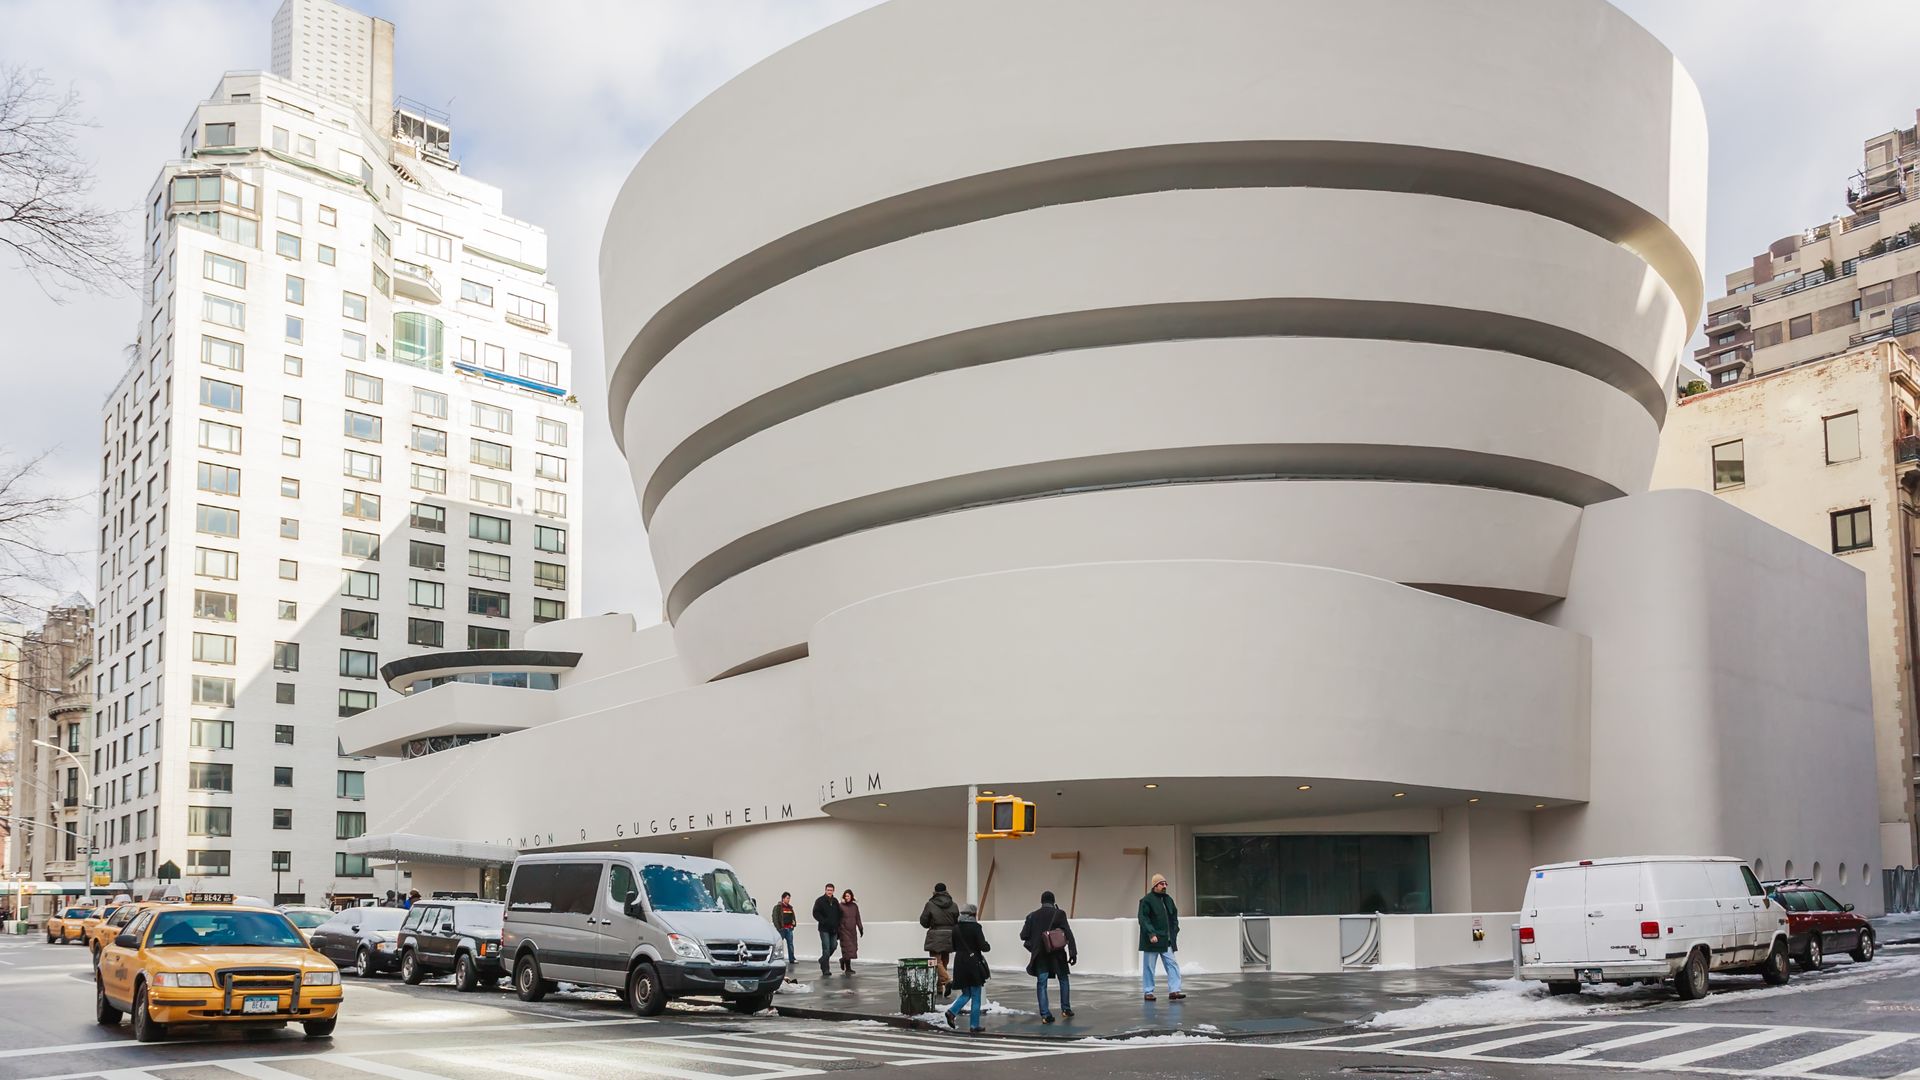 The Solomon R. Guggenheim Museum of modern and contemporary art in New York 